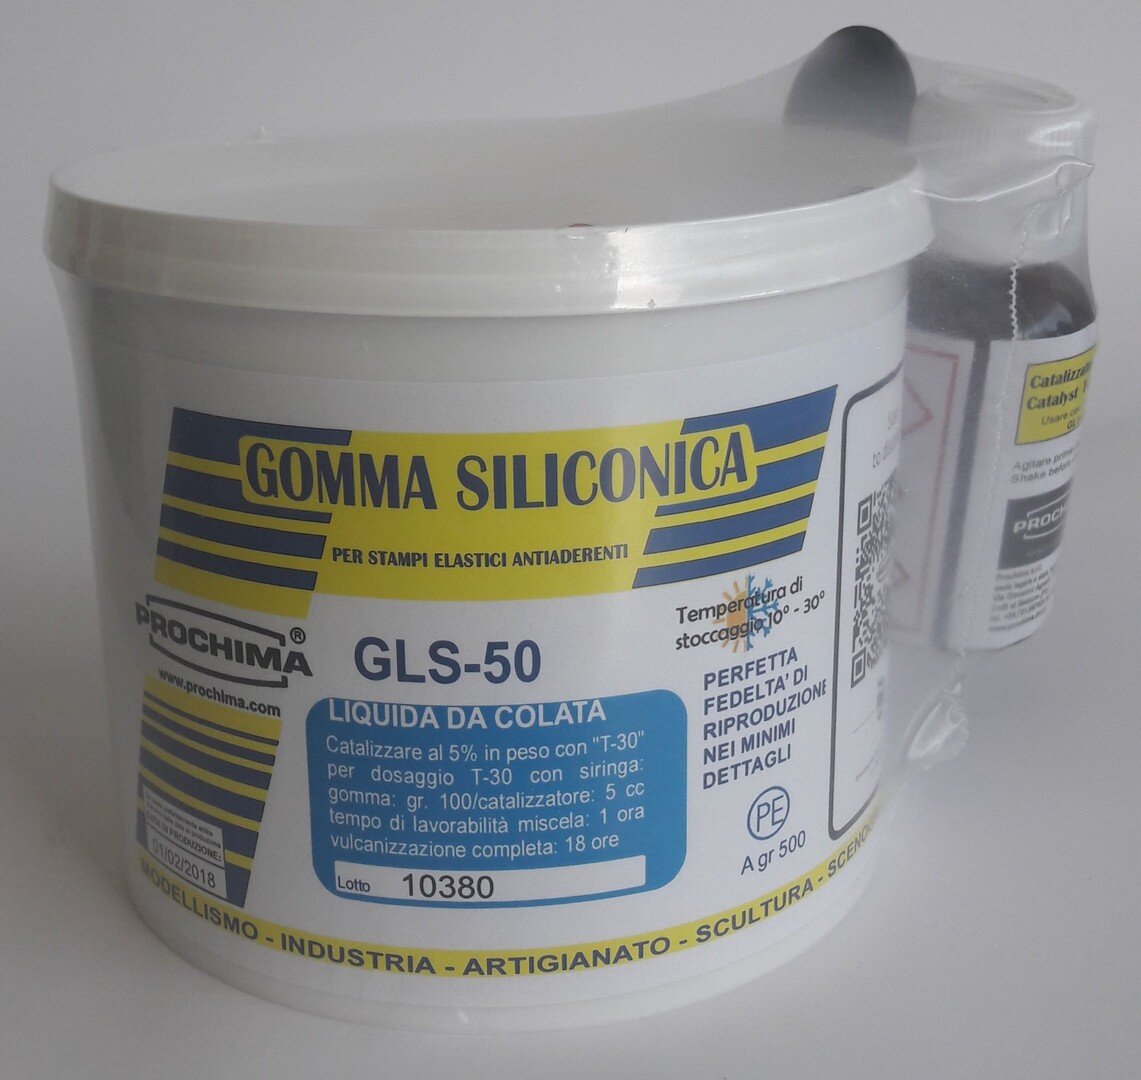 GLS-50 Gomma siliconica  - Resin Shop